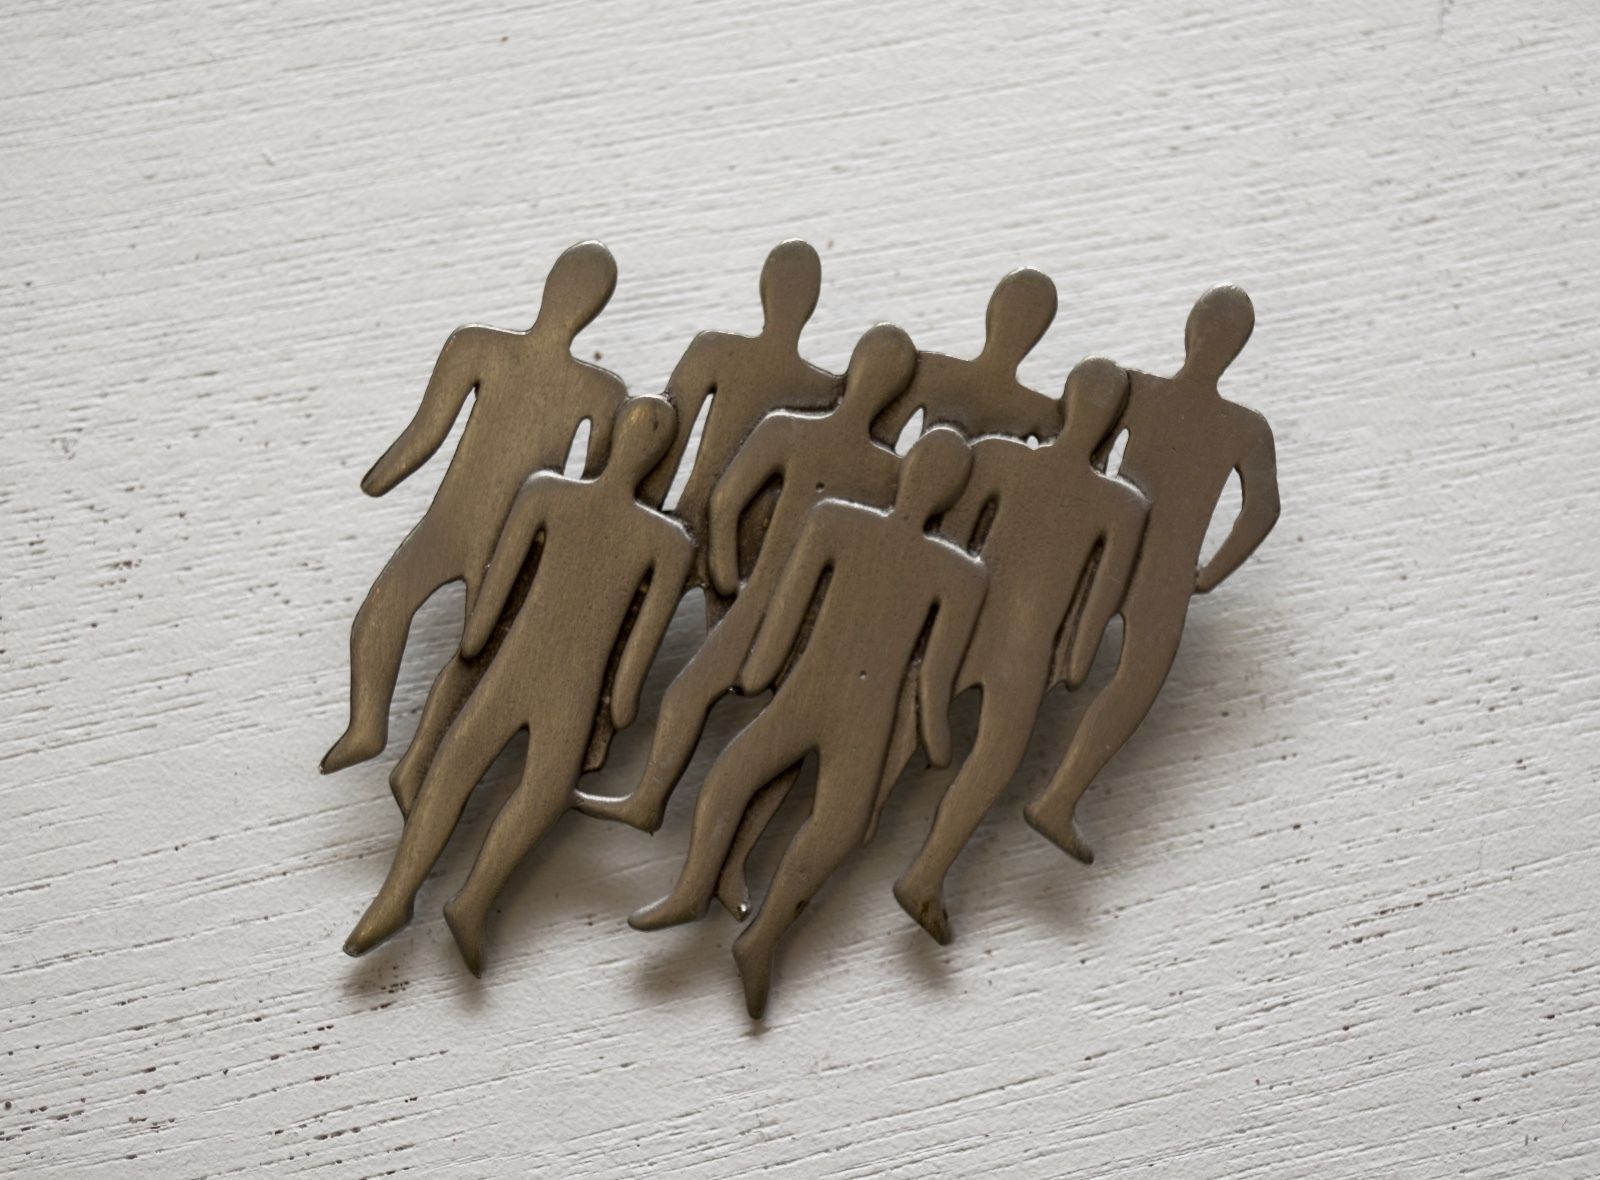 Primary image for JJ 1988 People Human Crowd Silhouette BROOCH Pin - PEWTER - FREE SHIPPING